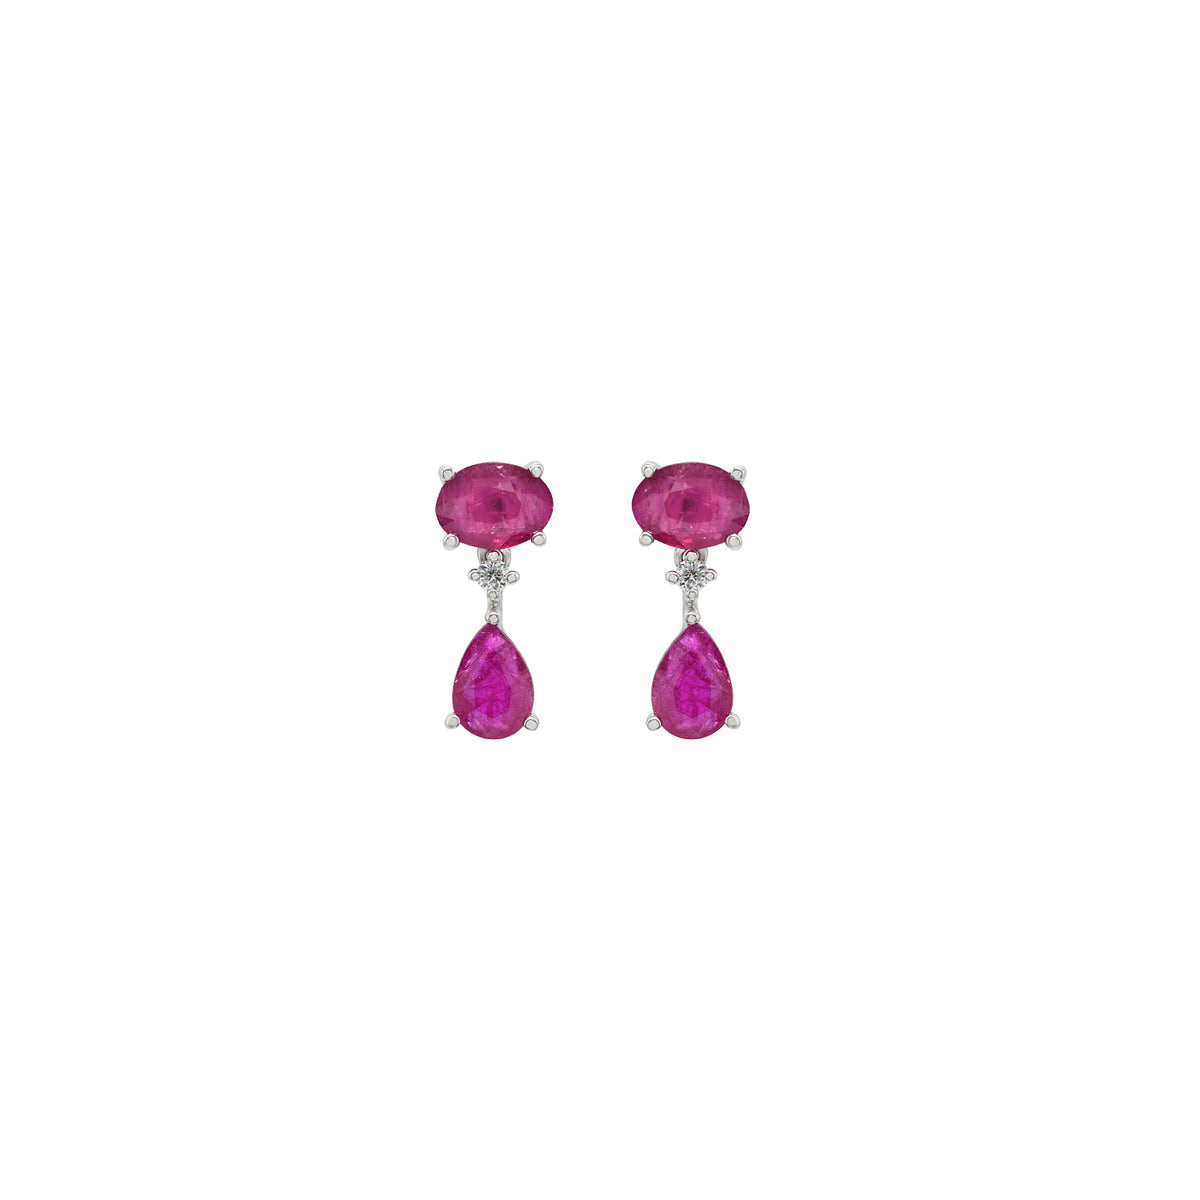 Gold and Diamond Earring. Ruby Earring. White gold earring. Σκουλαρίκια με ρουμπίνια. Σουλαρίκι με ρουμπίνι και διαμάντι.